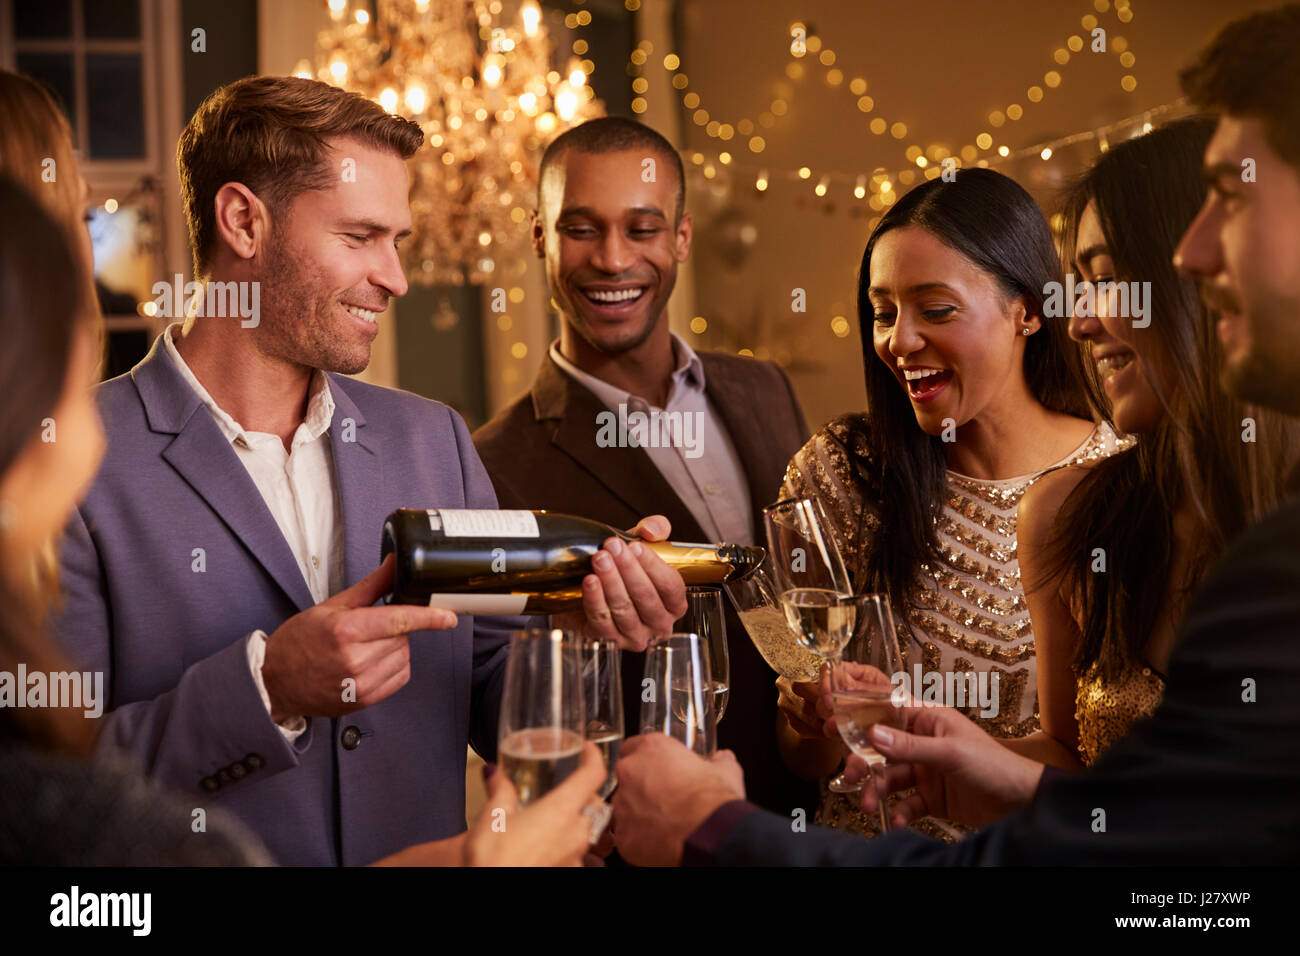 Friends Open Champagne As They Celebrate At Party Together Stock Photo